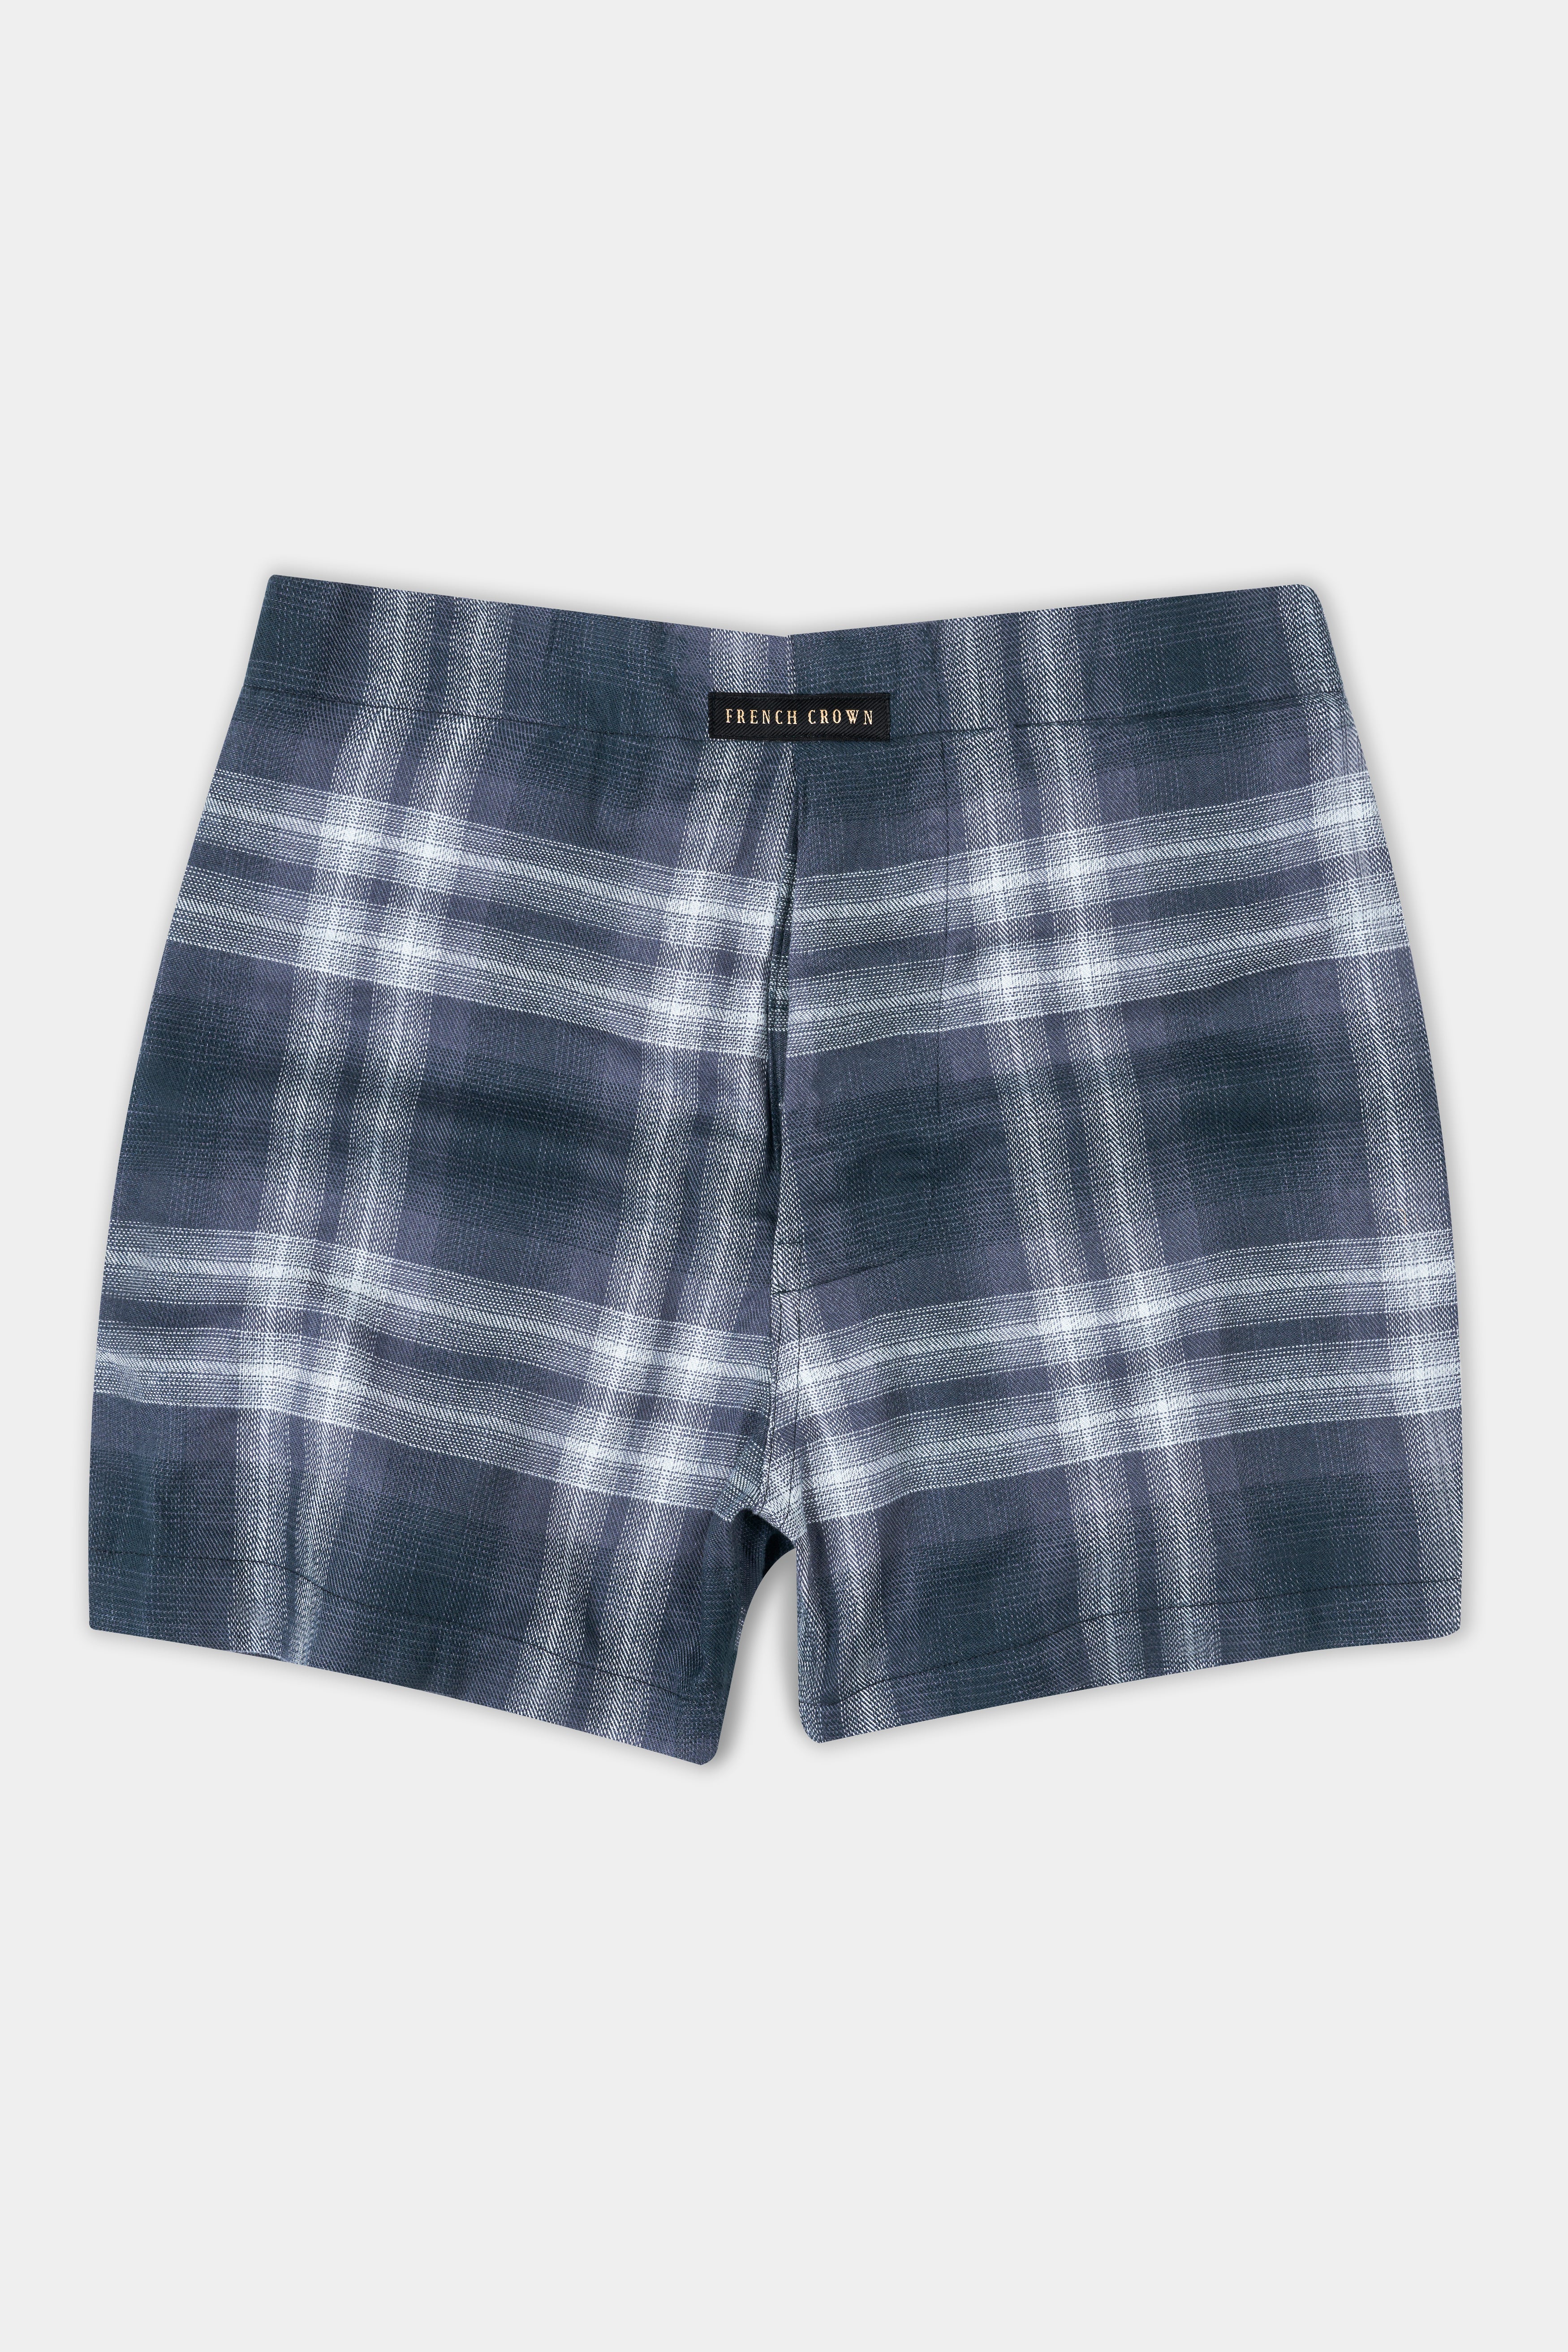 Vampire Gray With White Checkered Flannel Premium Cotton Boxer BX558-28, BX558-30, BX558-32, BX558-34, BX558-36, BX558-38, BX558-40, BX558-42, BX558-44